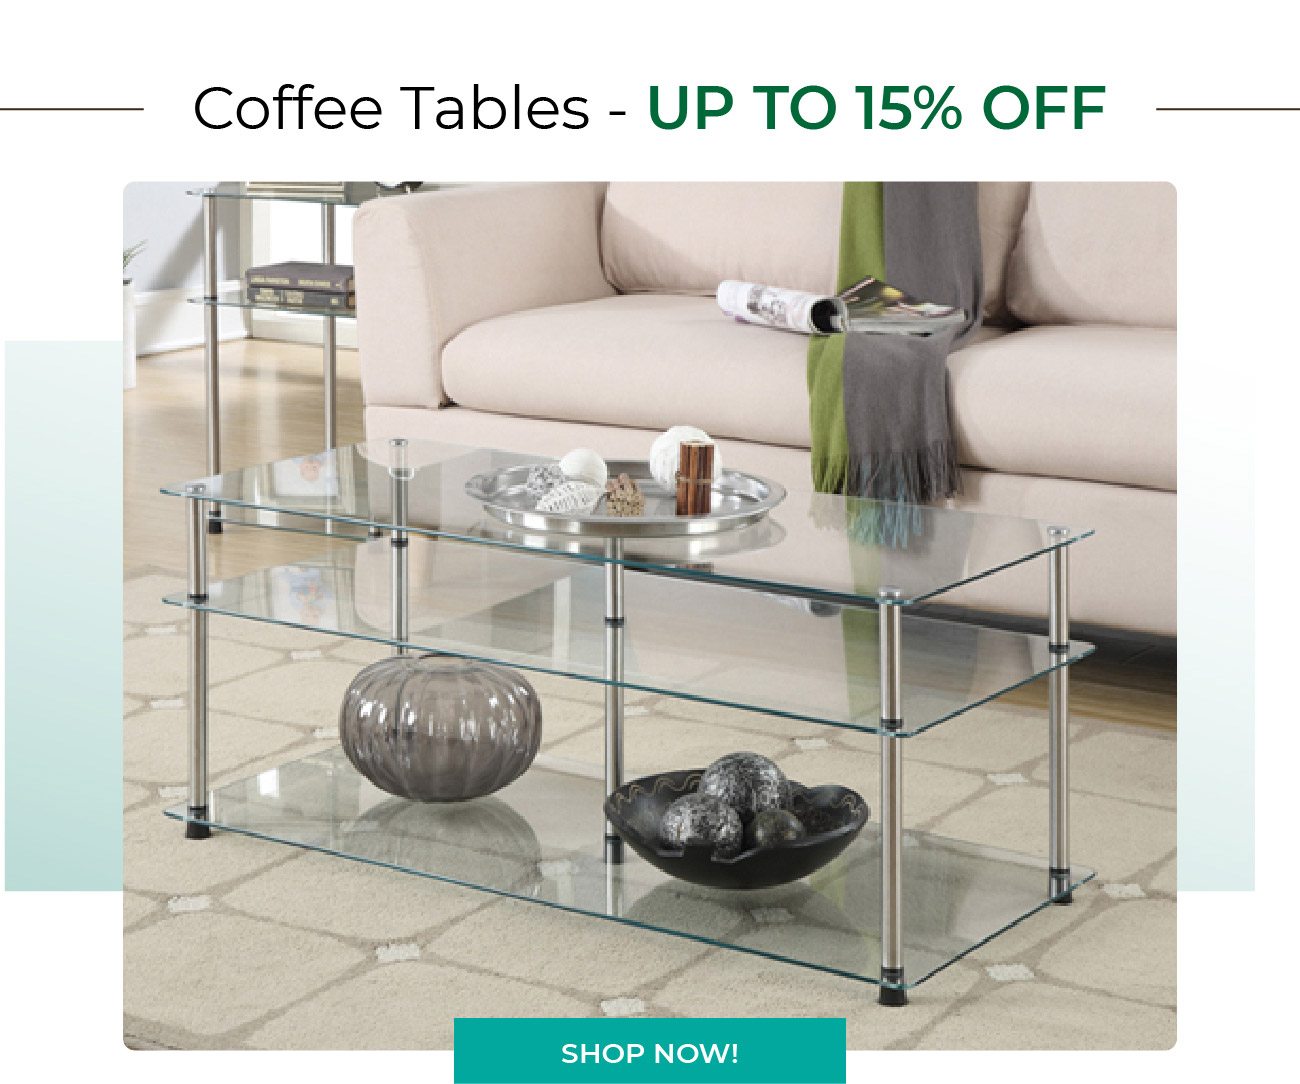 Coffee Tables - Up to 15% off